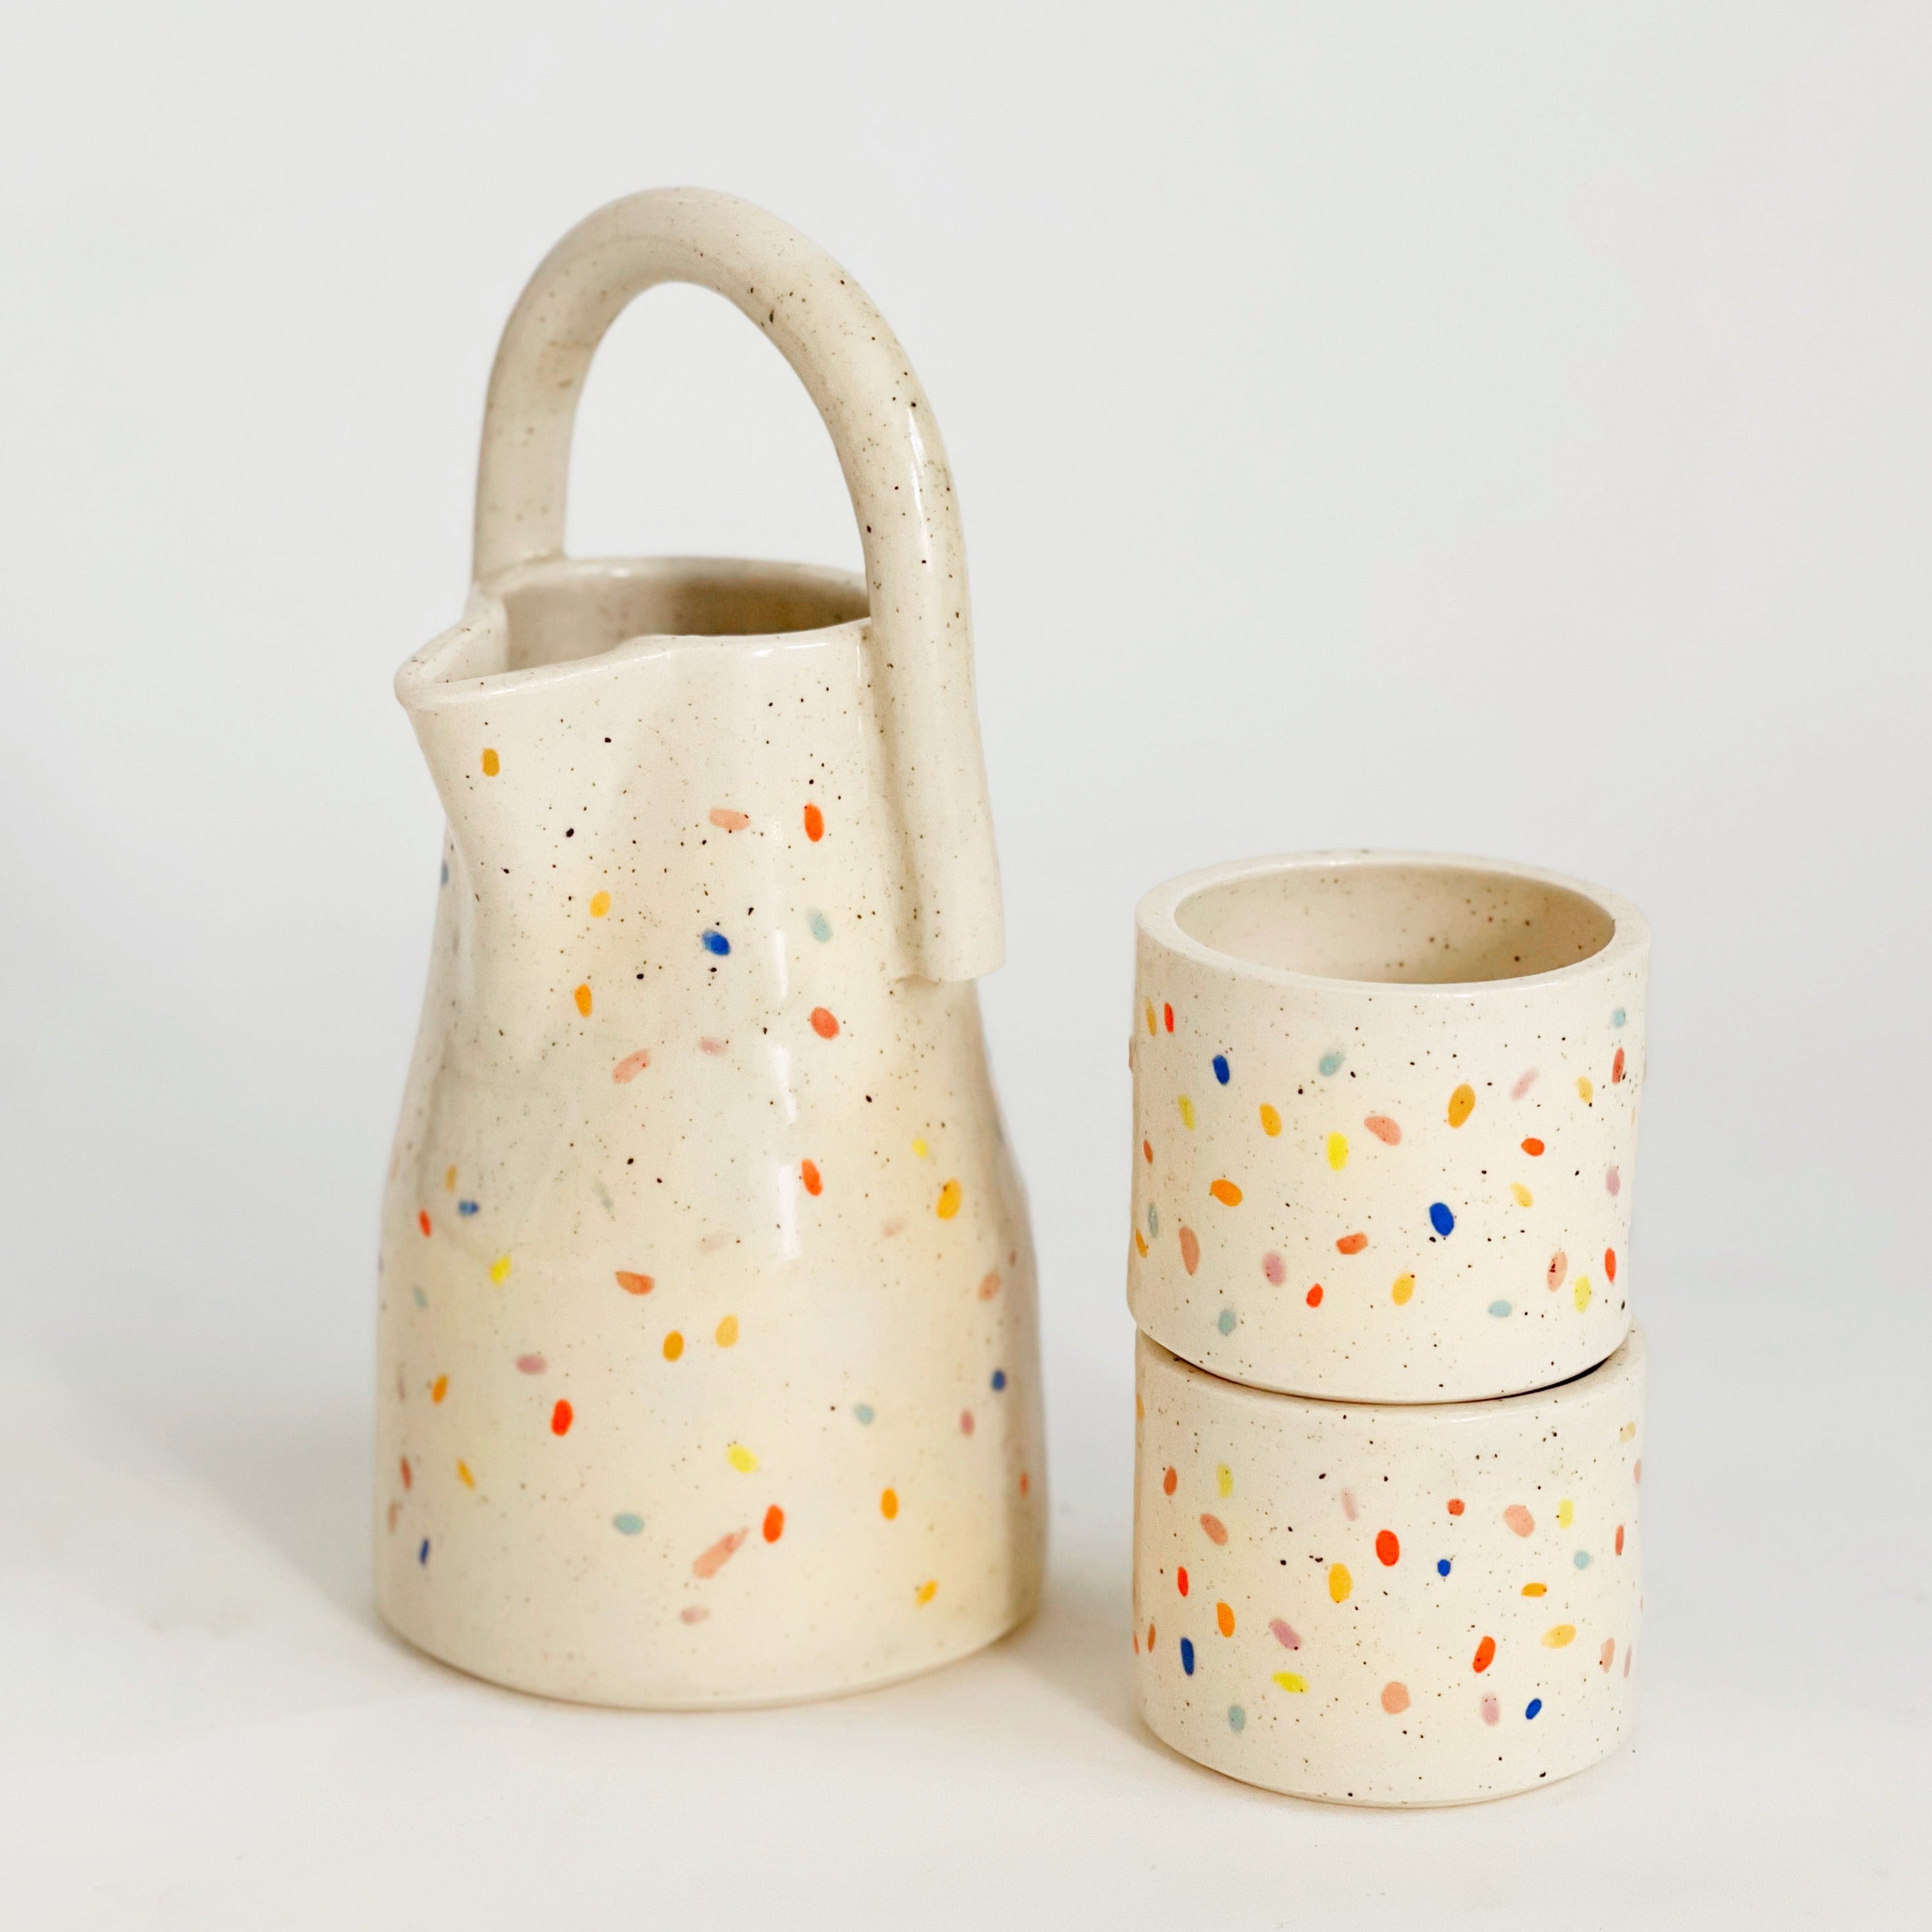 Double Sprinkles Handle Pitcher and Small Cups set